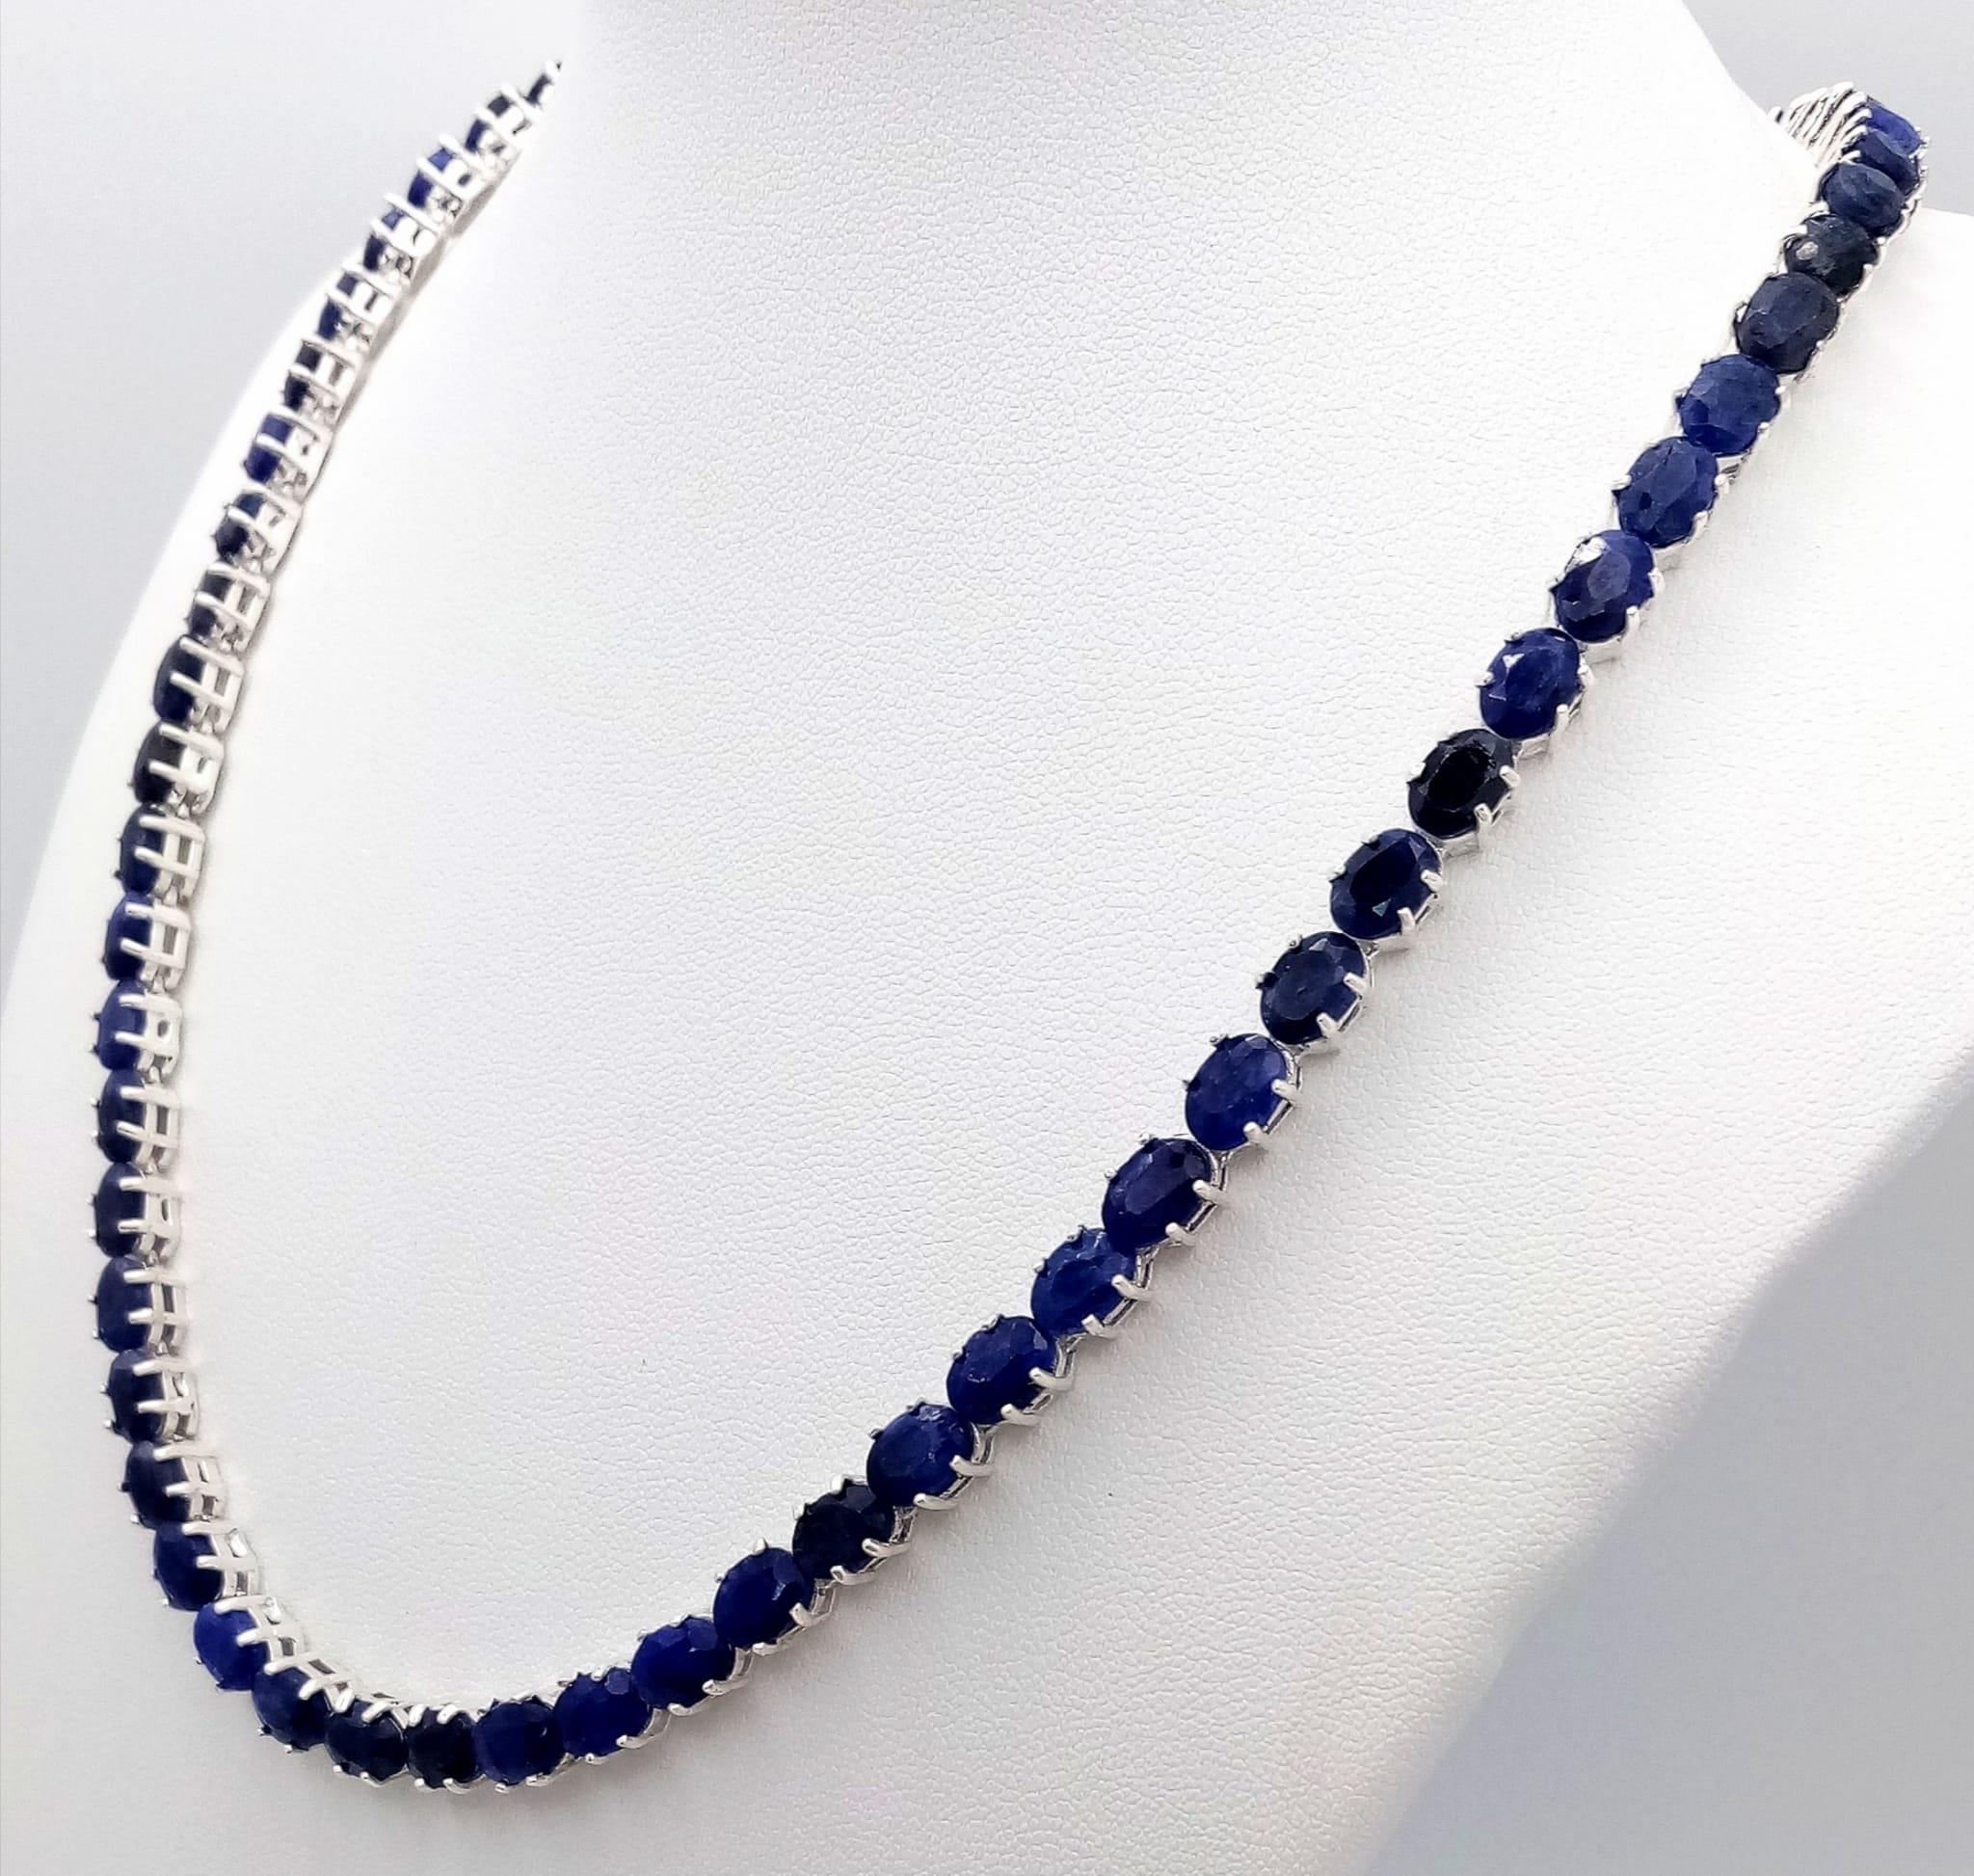 A Blue Sapphire Gemstone Tennis Necklace set in 925 Silver. 45cm length. 39.7g total weight. CD-1229 - Image 2 of 4